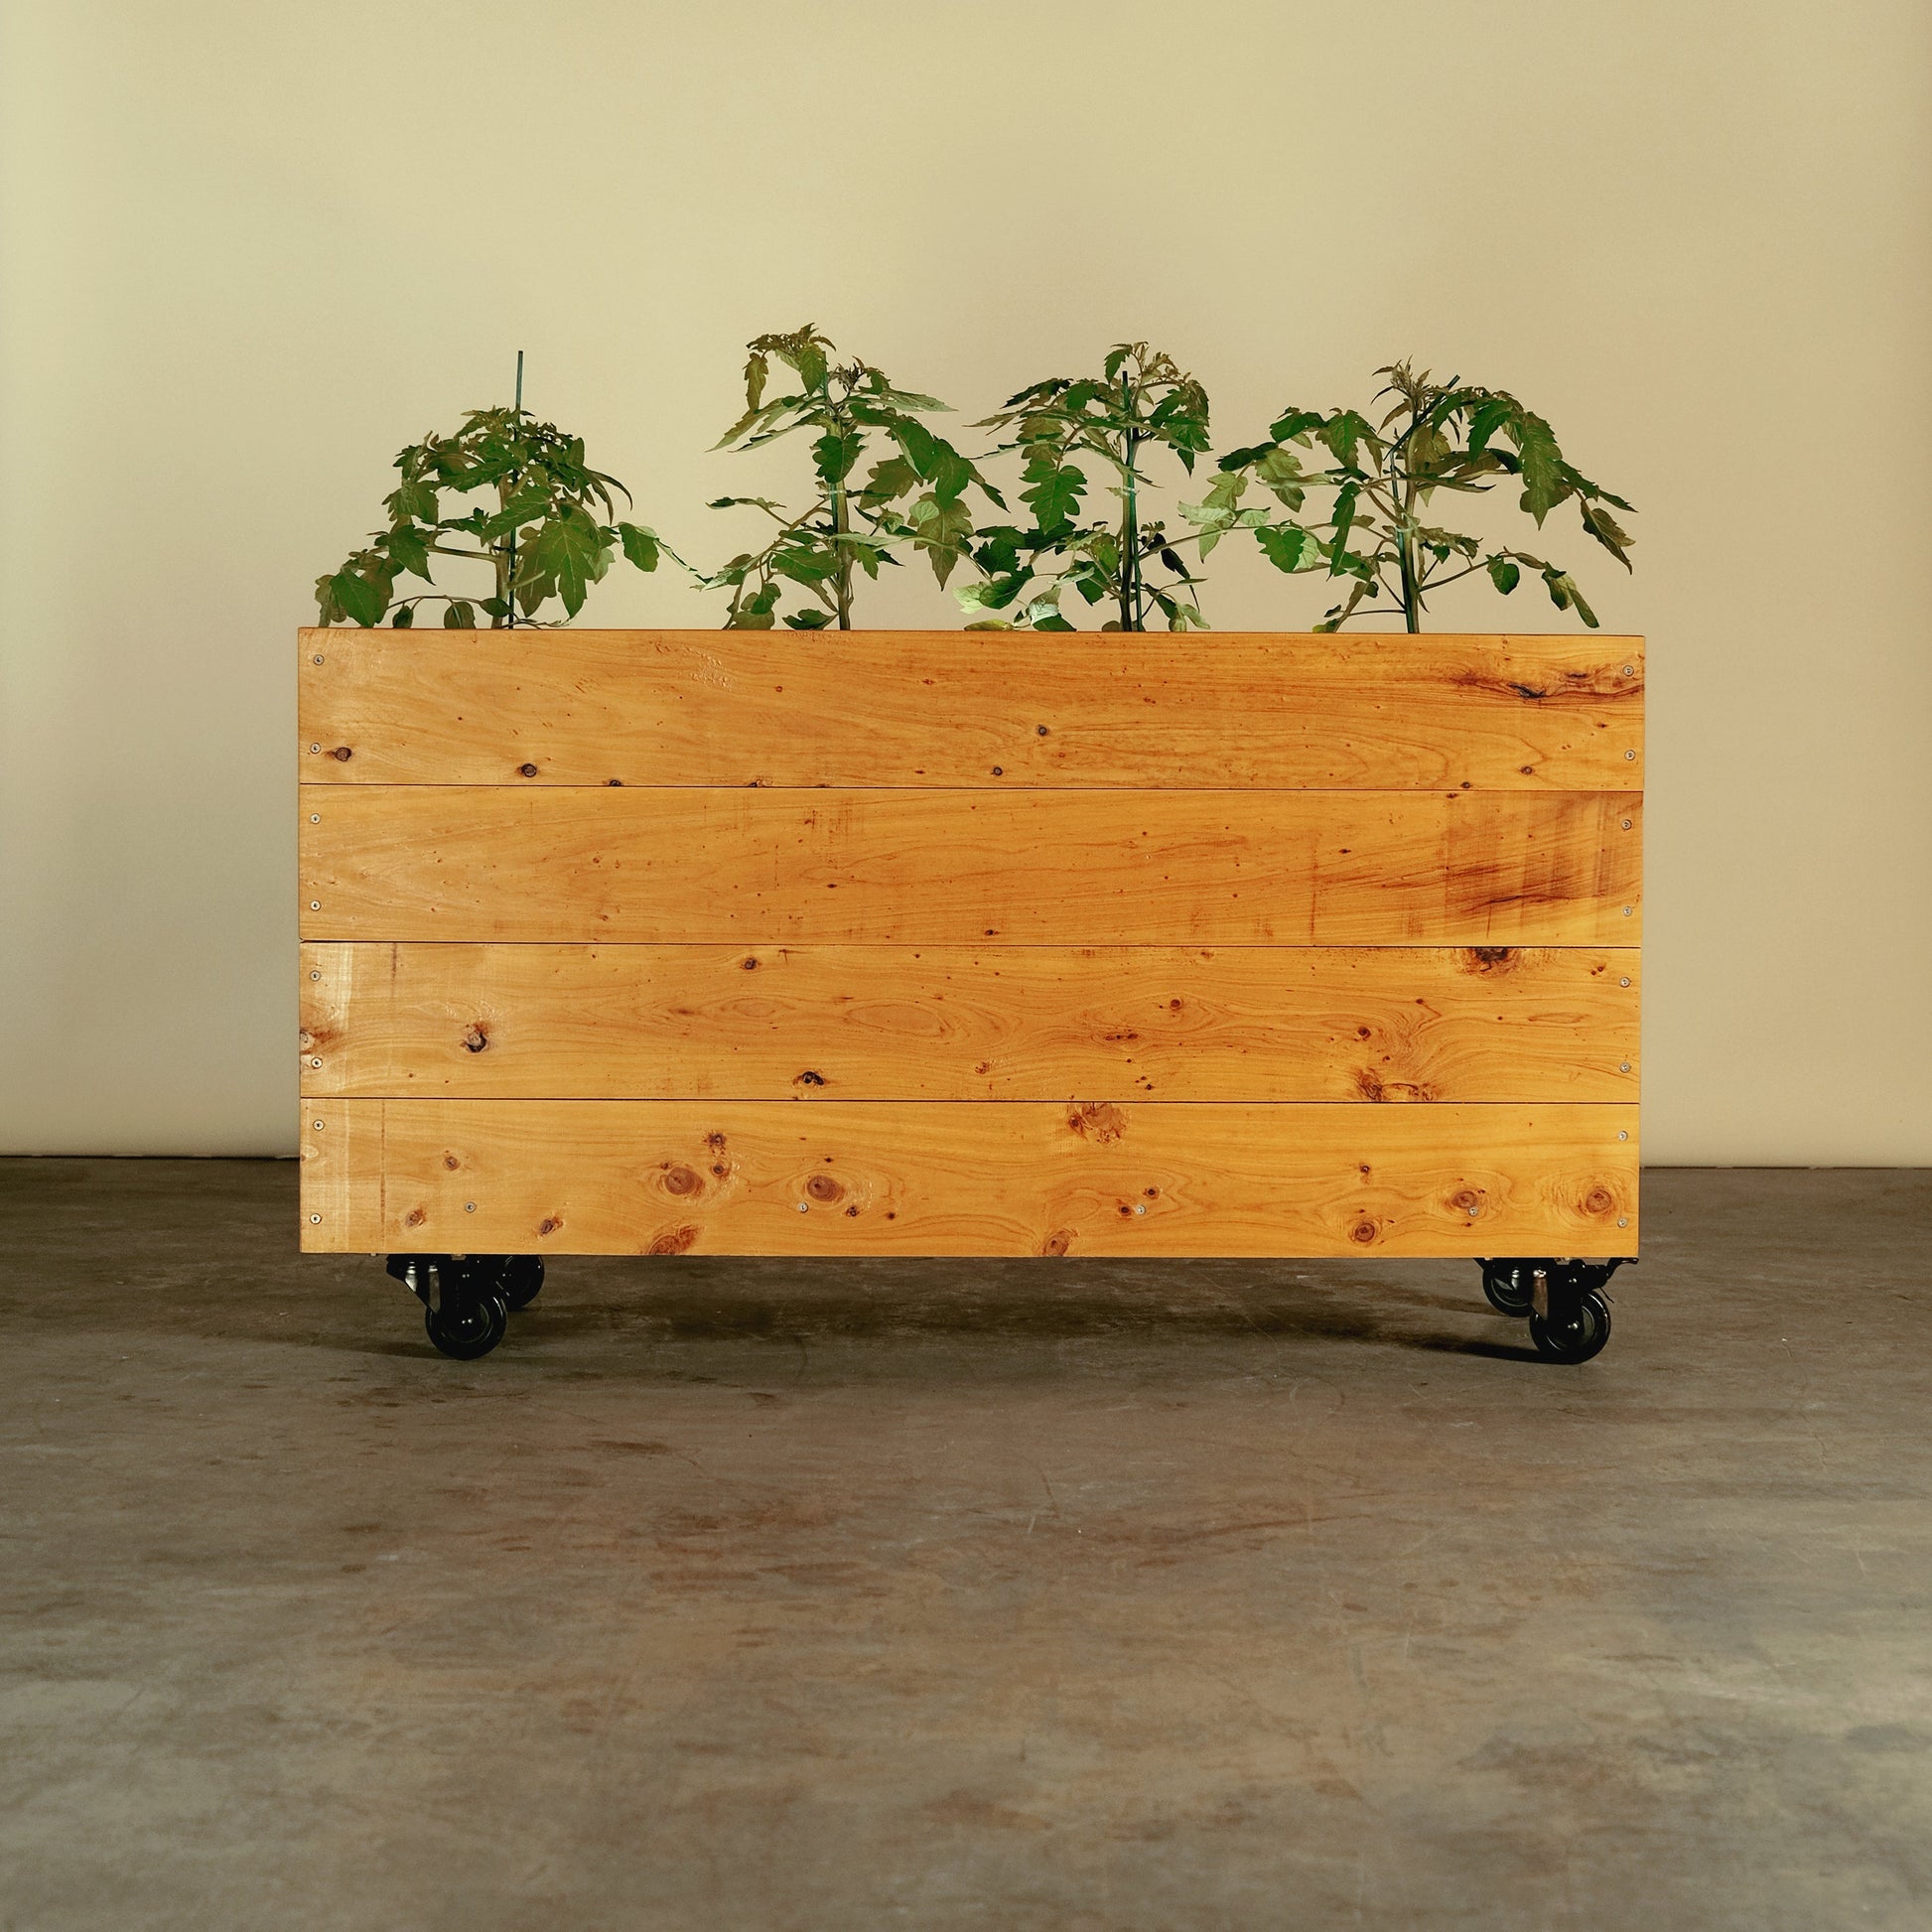 Made from sustainable cypress, this veggie patch on wheels is perfect for growing vegetables on balconies and small gardens. Supplied with a liner, exterior oil and wheels this box is ready to start growing.